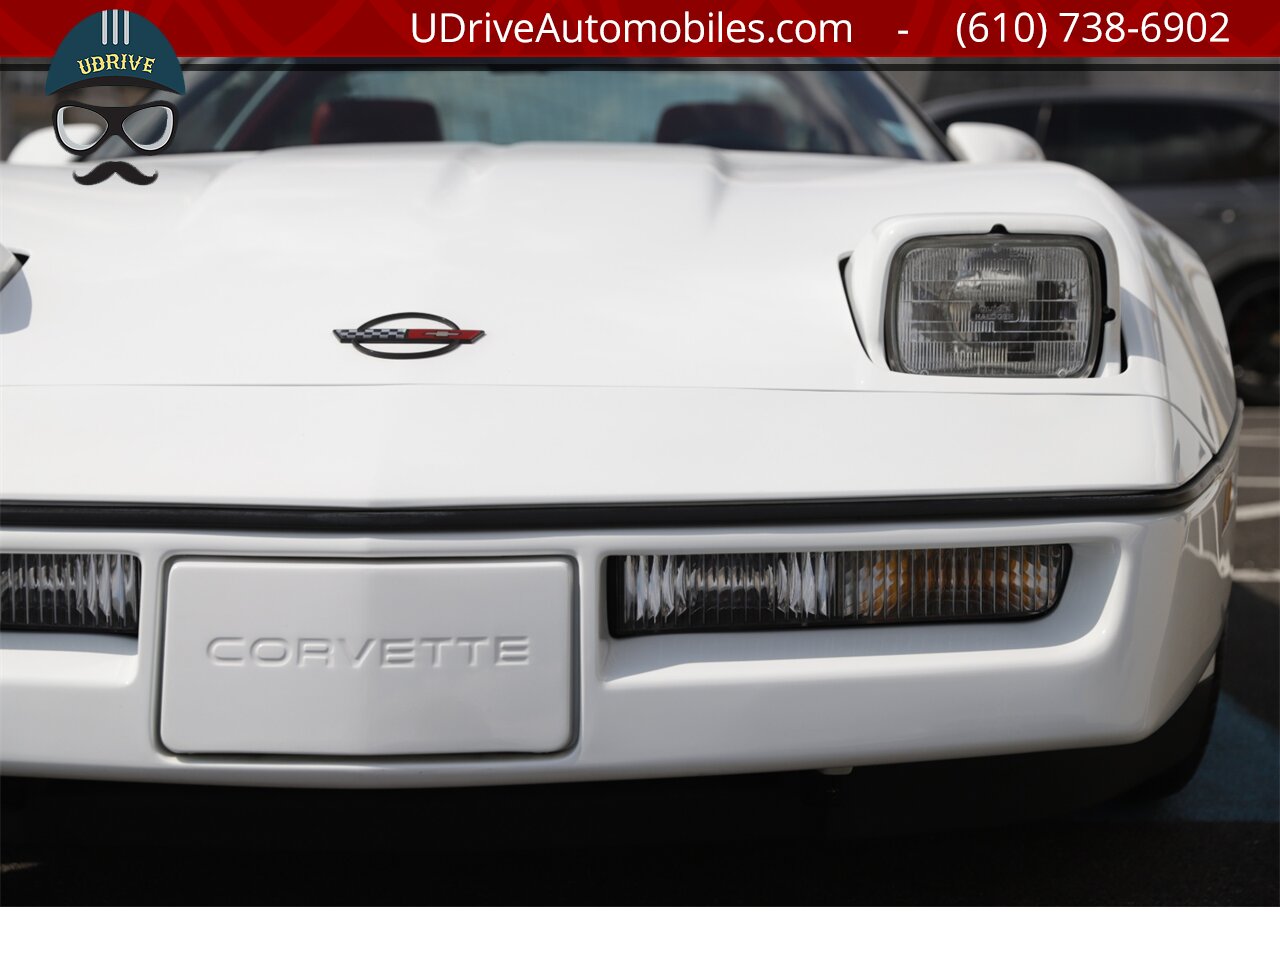 1990 Chevrolet Corvette 3k MIles 1 Owner White over Red Sport Seats   - Photo 11 - West Chester, PA 19382